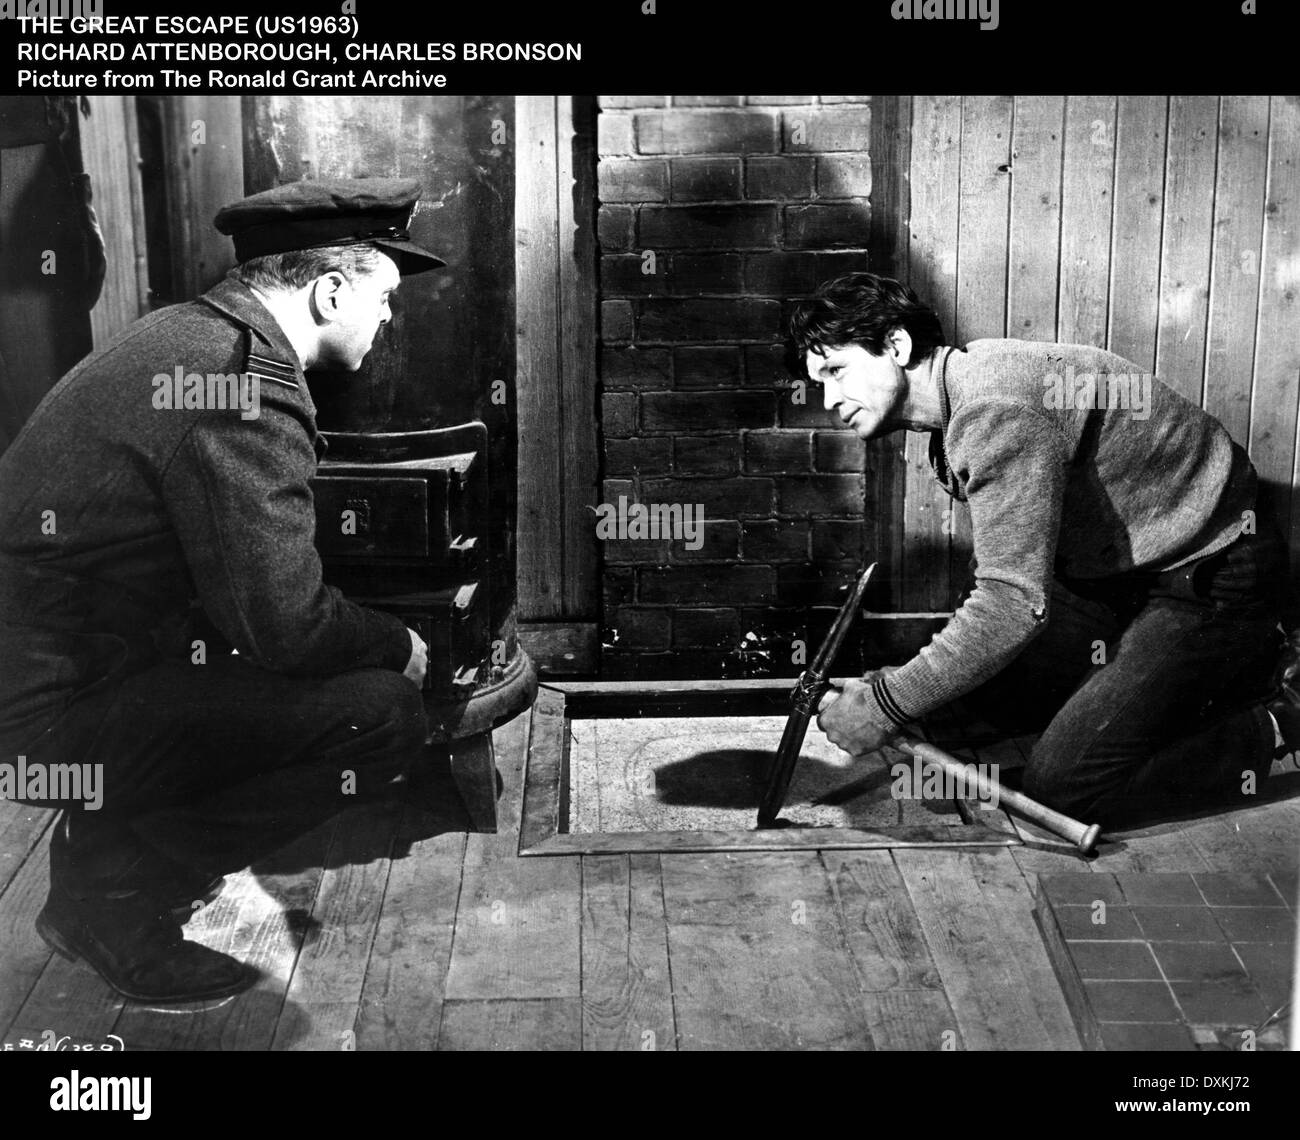 THE GREAT ESCAPE (US1963) RICHARD ATTENBOROUGH AND CHARLES B Stock Photo